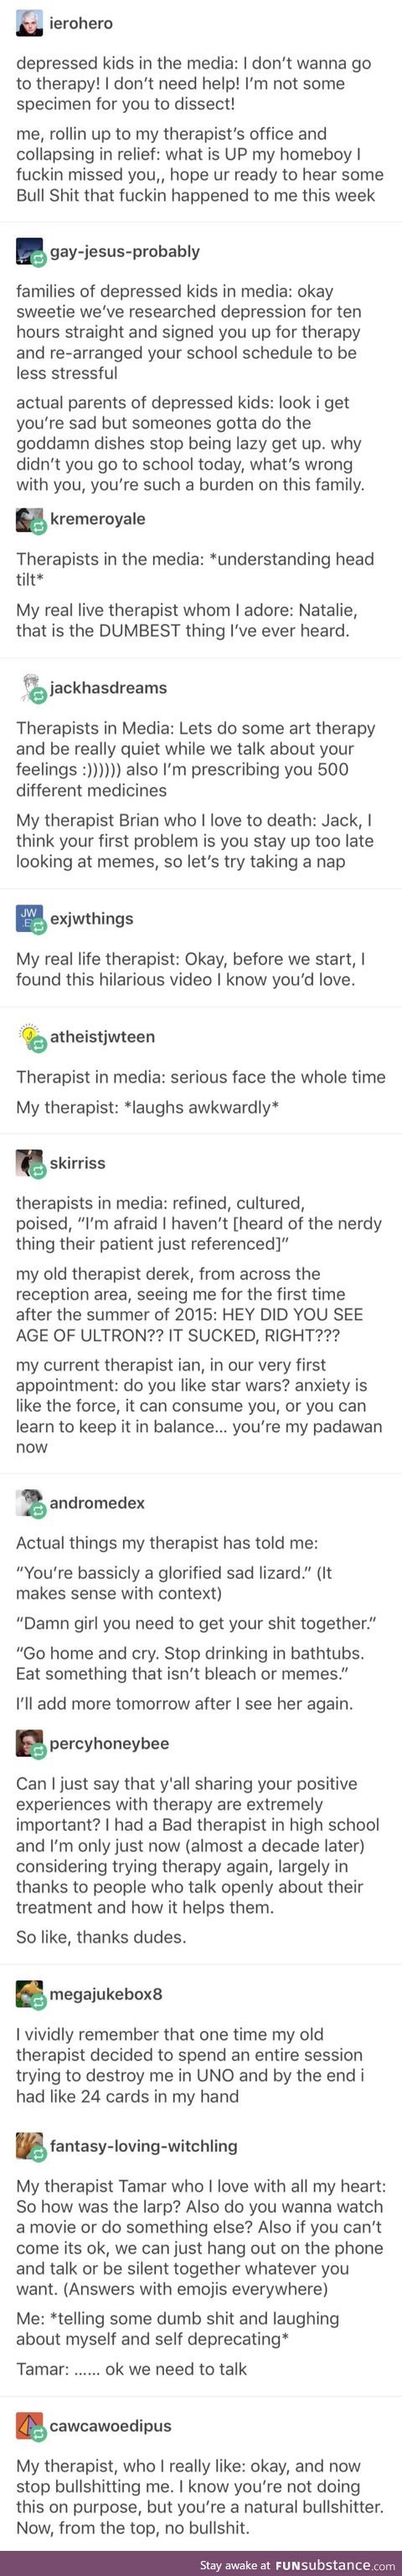 Therapy irl